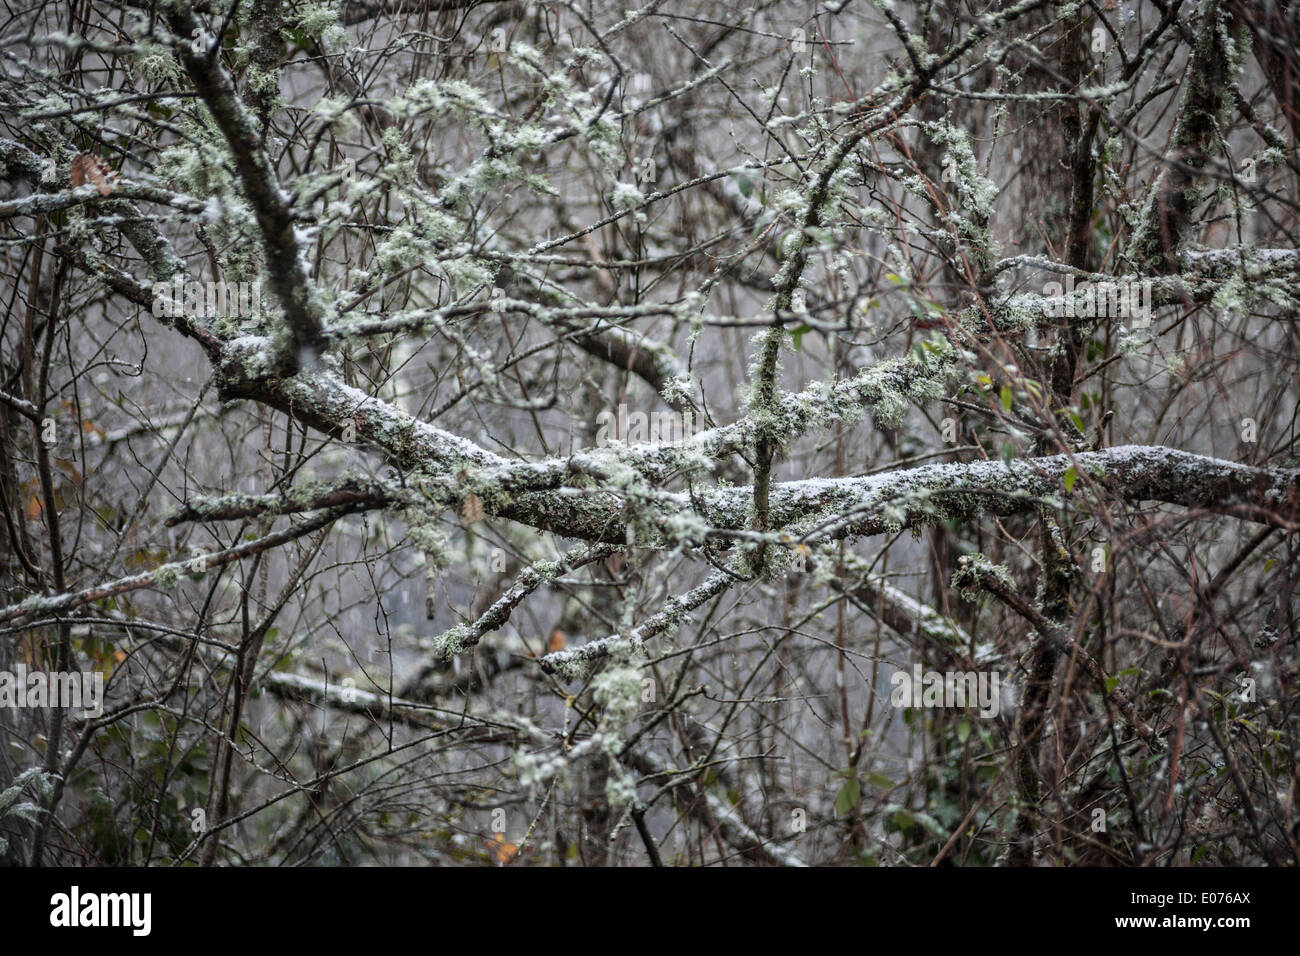 tree branches covered with lichens and moss Stock Photo